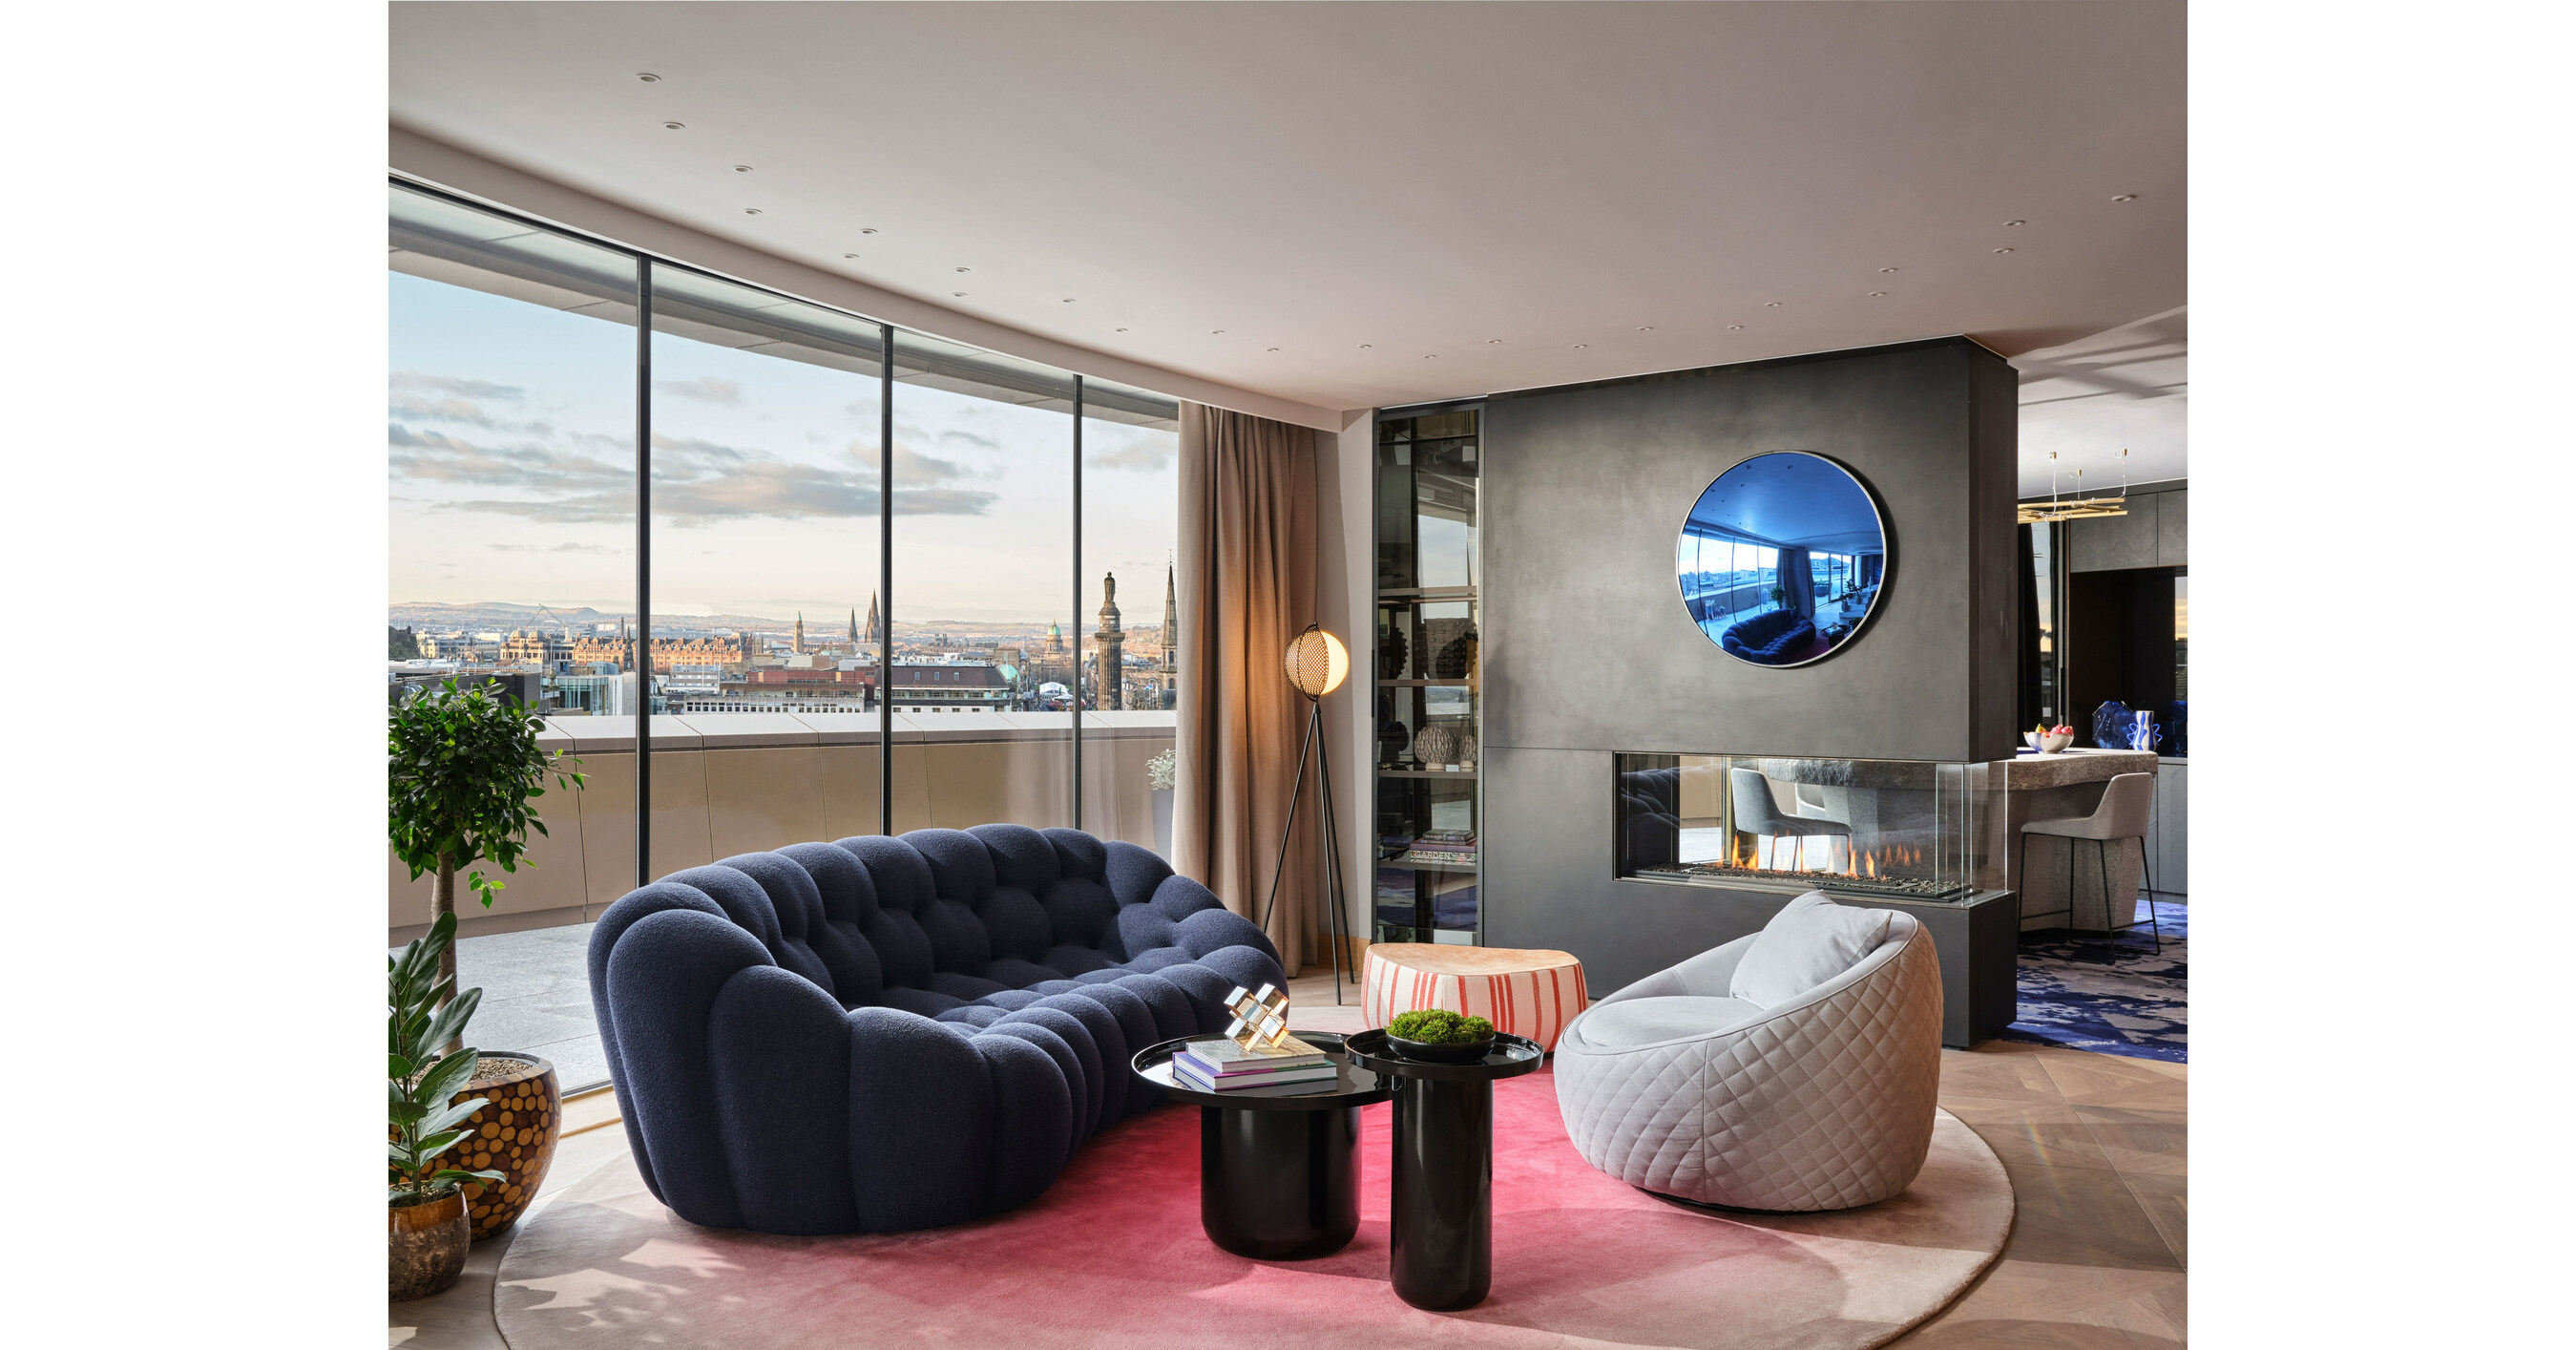 W HOTELS DEBUTS W EDINBURGH, MARKING THE ICONIC BRAND’S EXPANSION IN THE UNITED KINGDOM